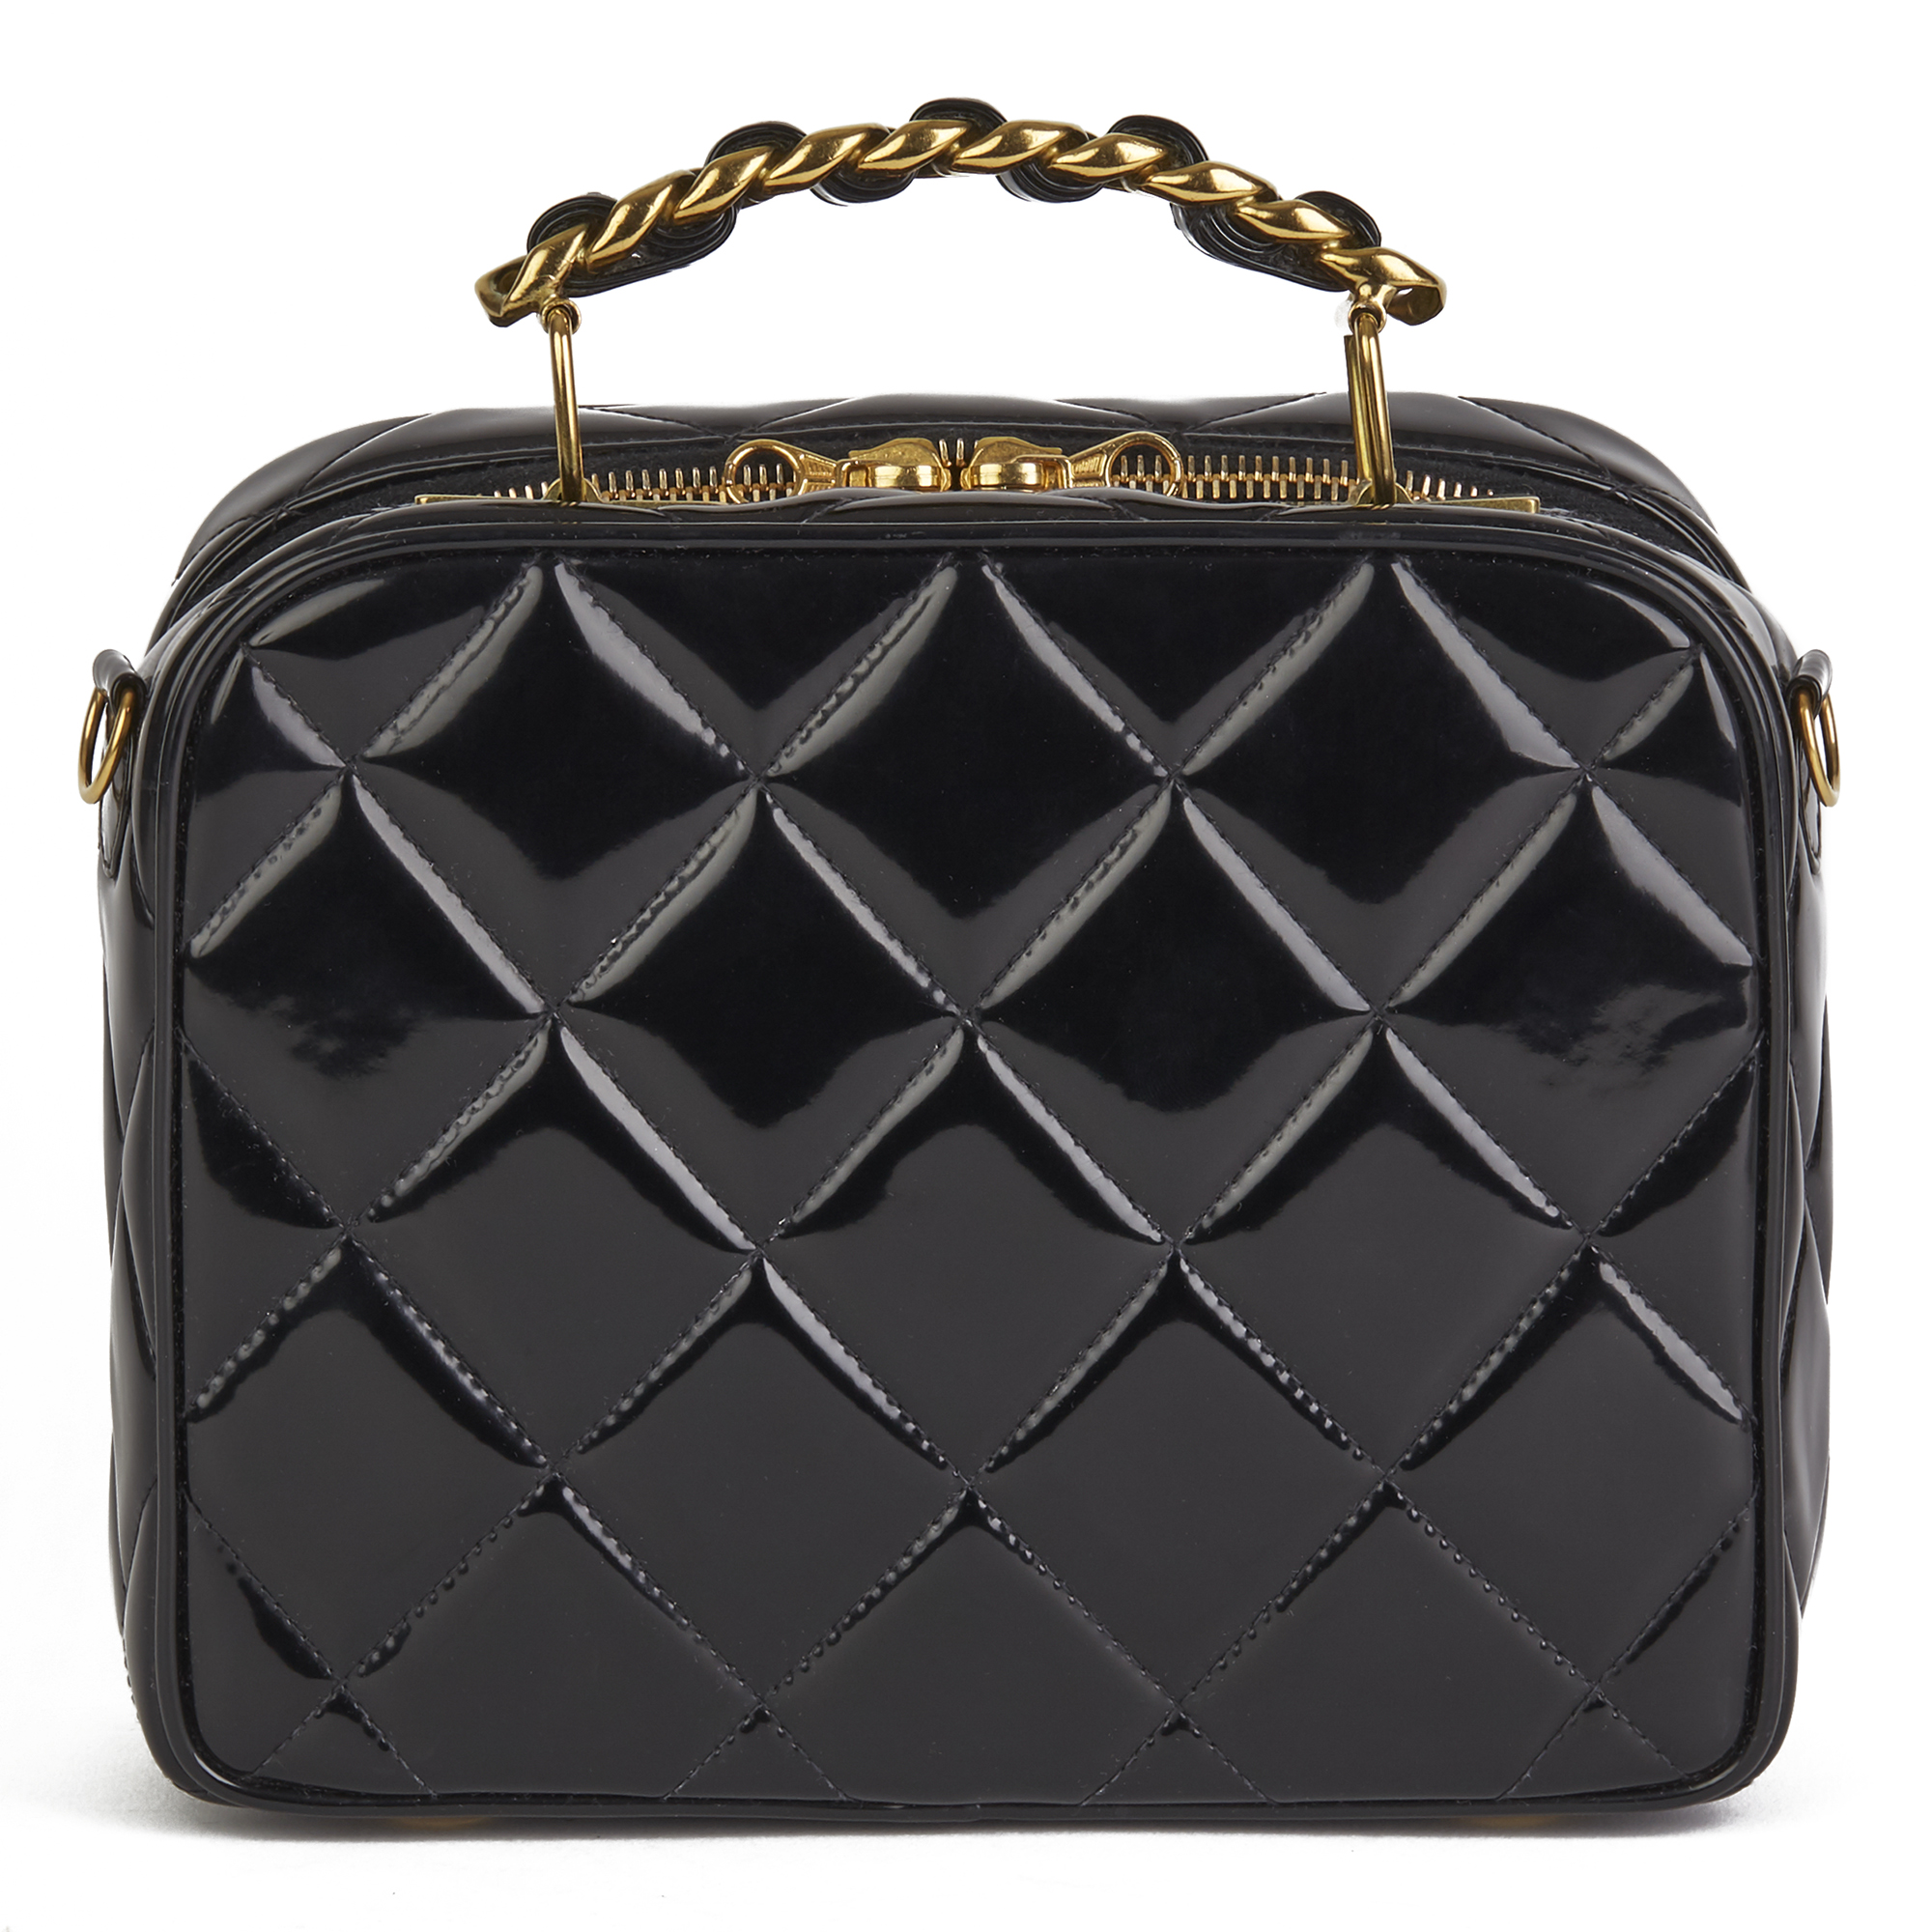 CHANEL BLACK QUILTED PATENT LEATHER VINTAGE SMALL TIMELESS LUNCH BOX BAG HB3157 | eBay